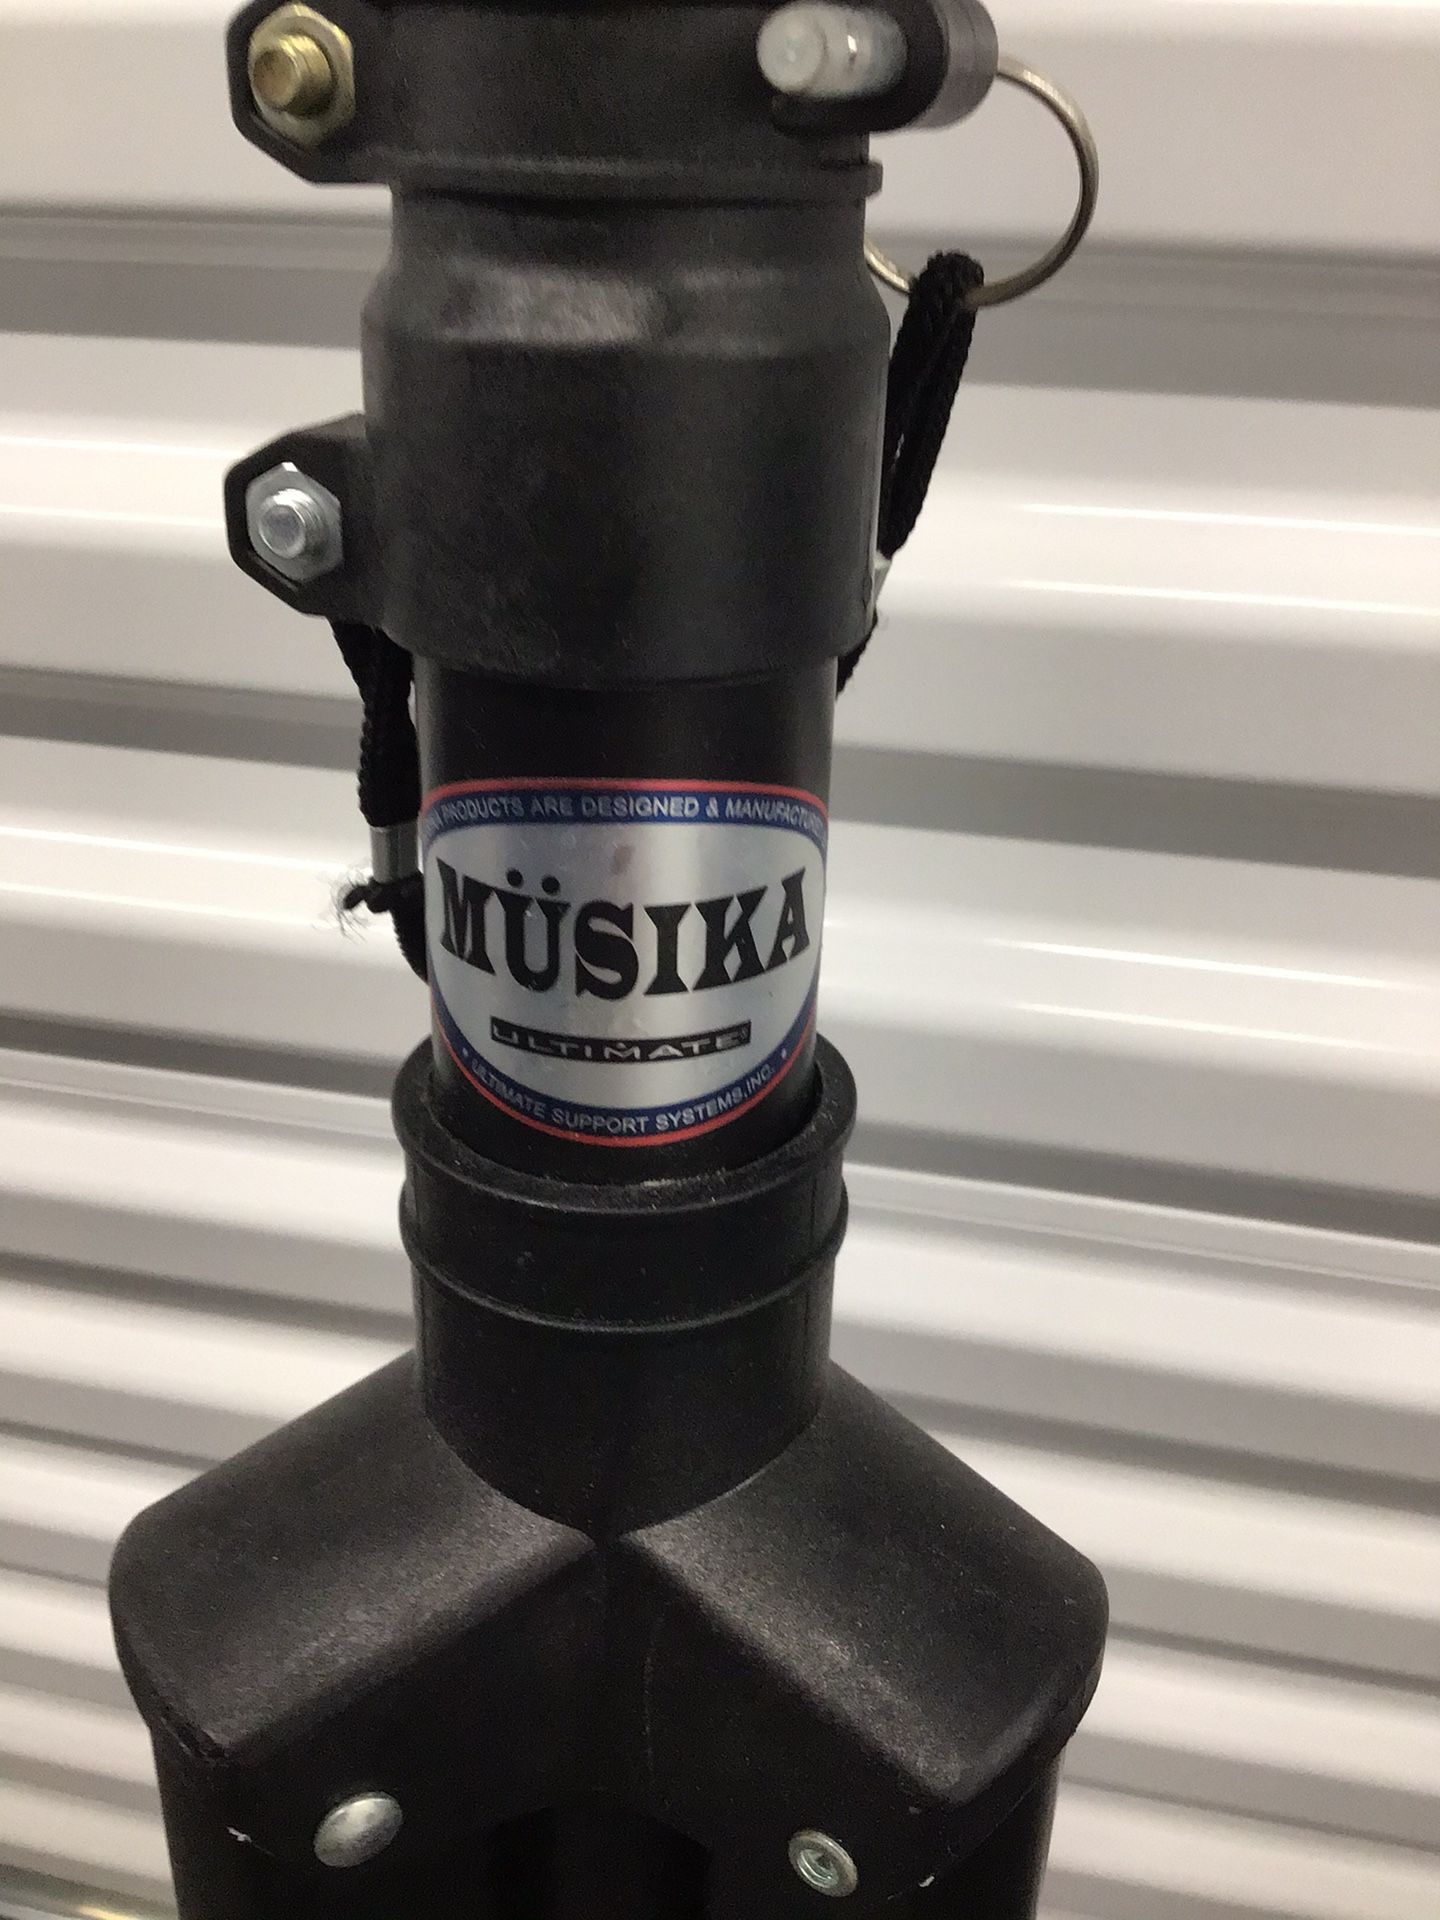 Musika Ultimate Tripod for speakers